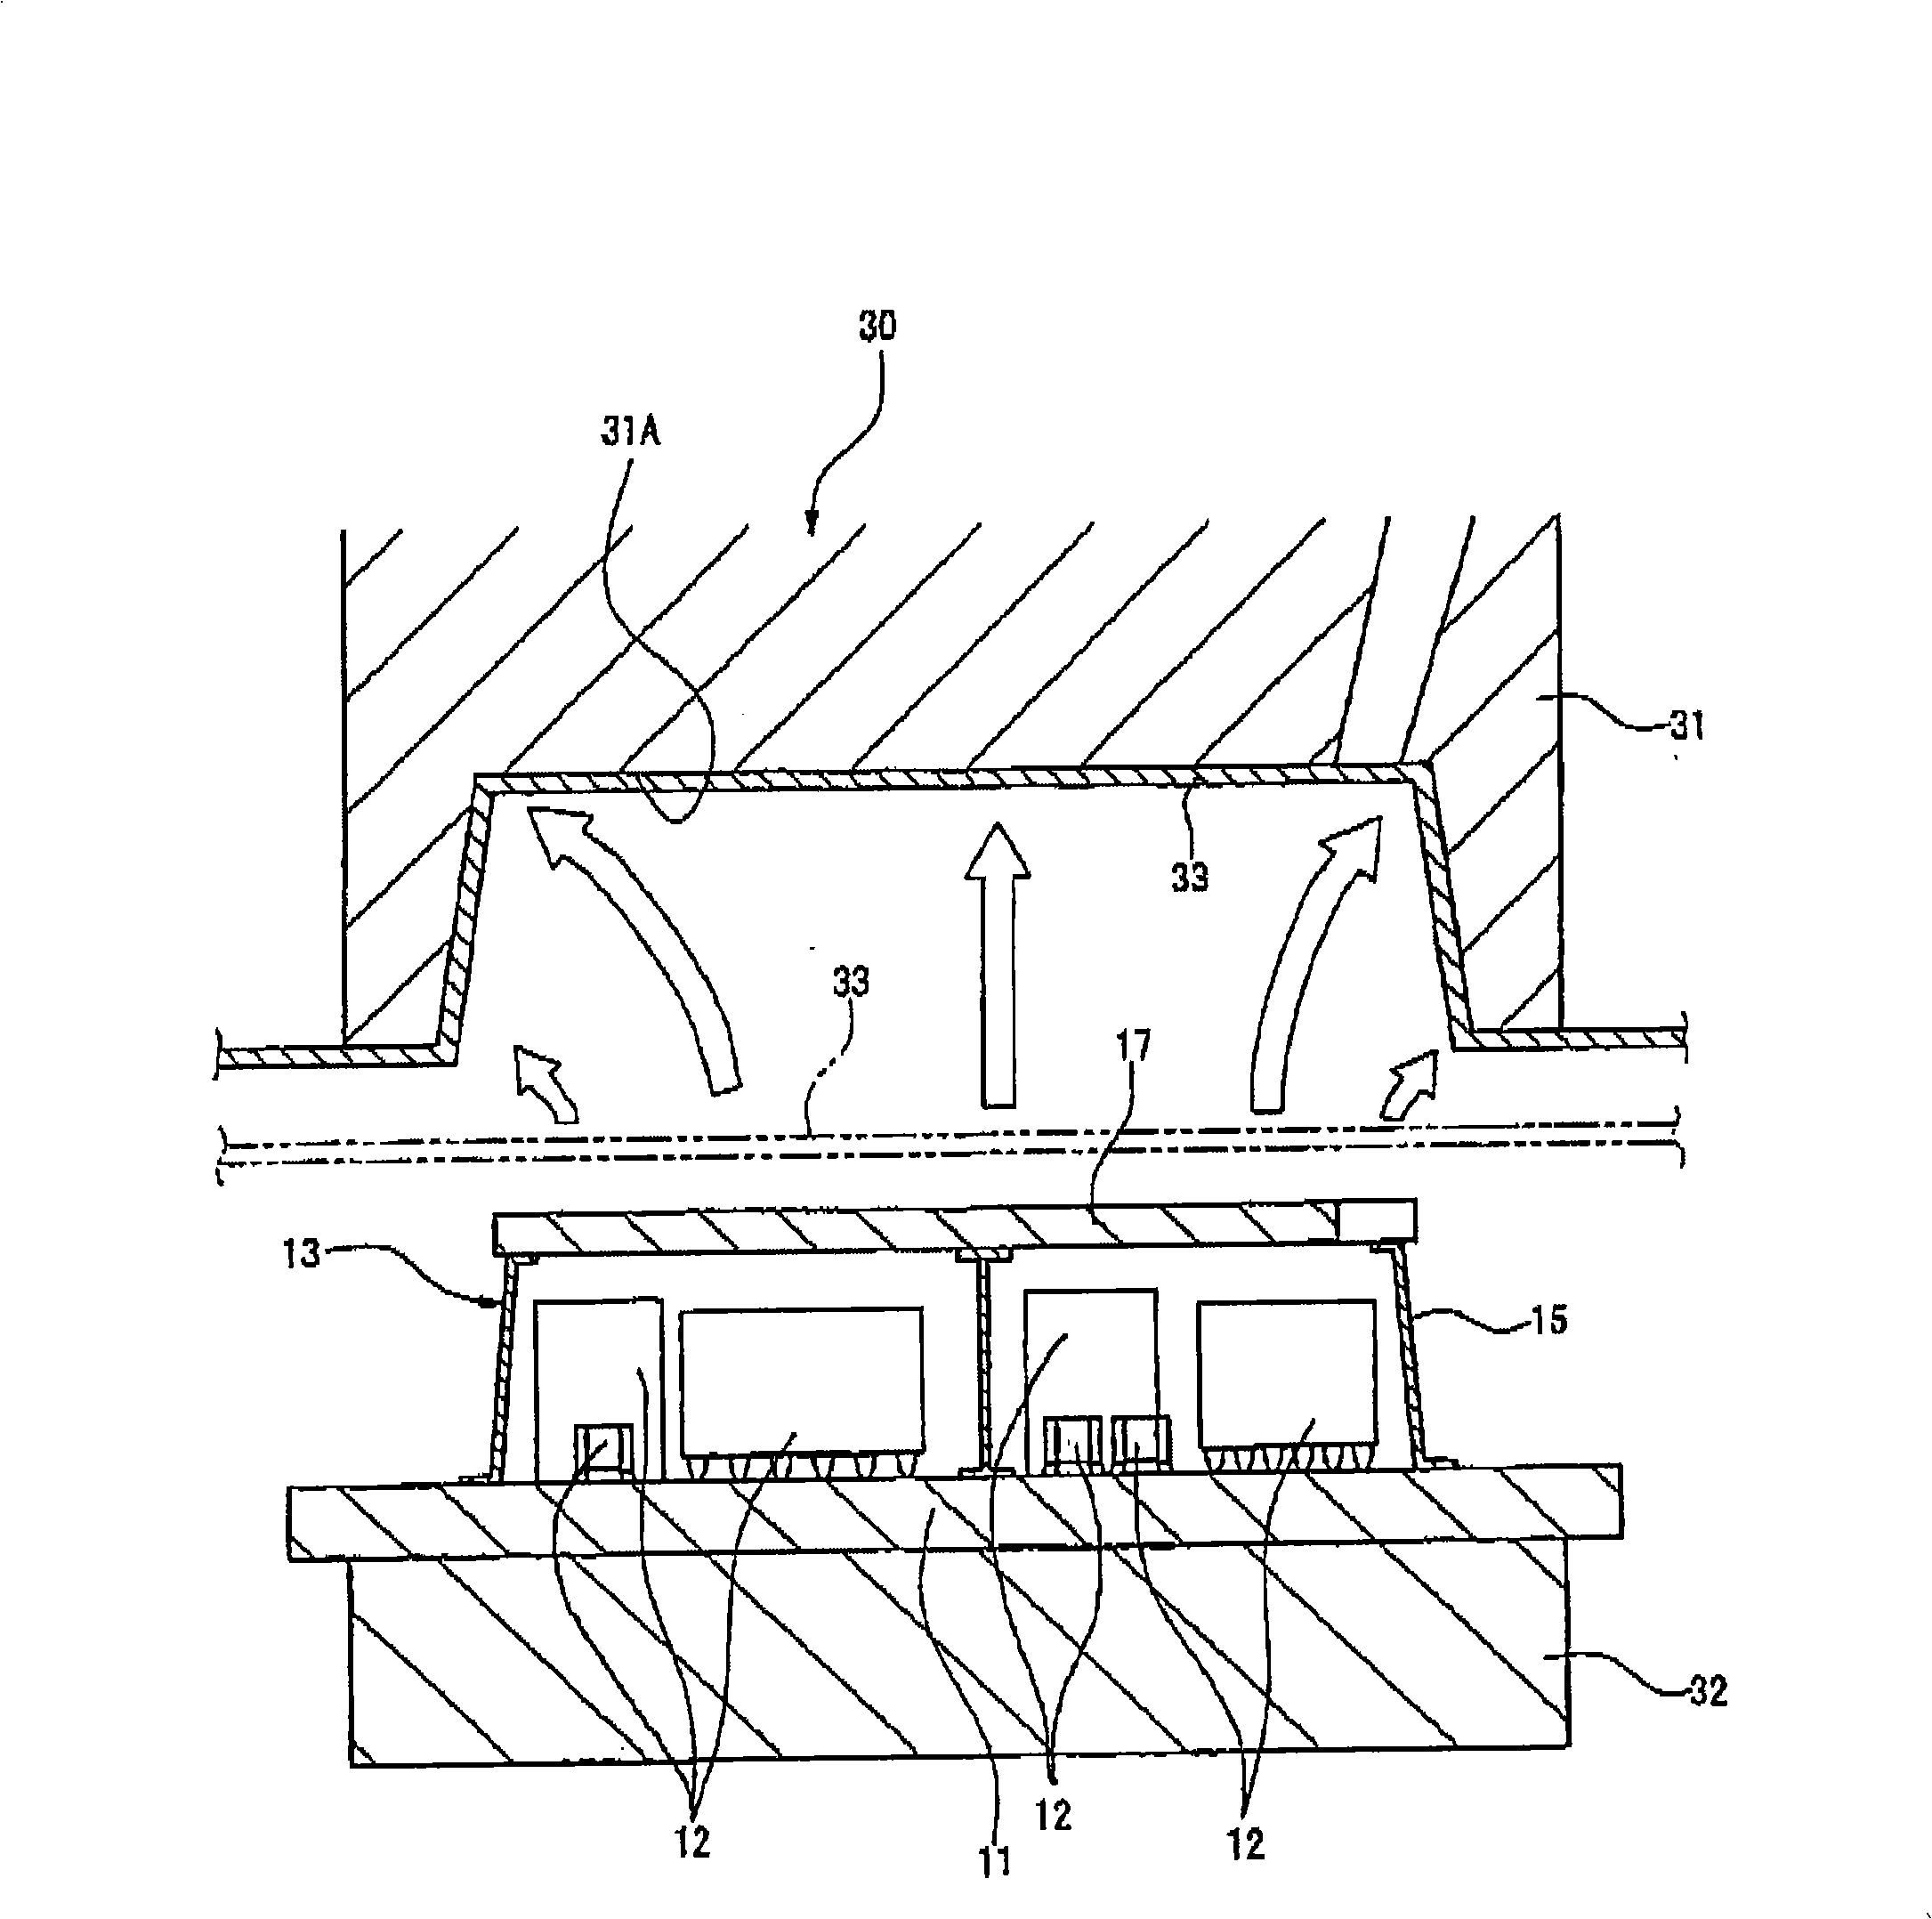 Board structure and electronic device